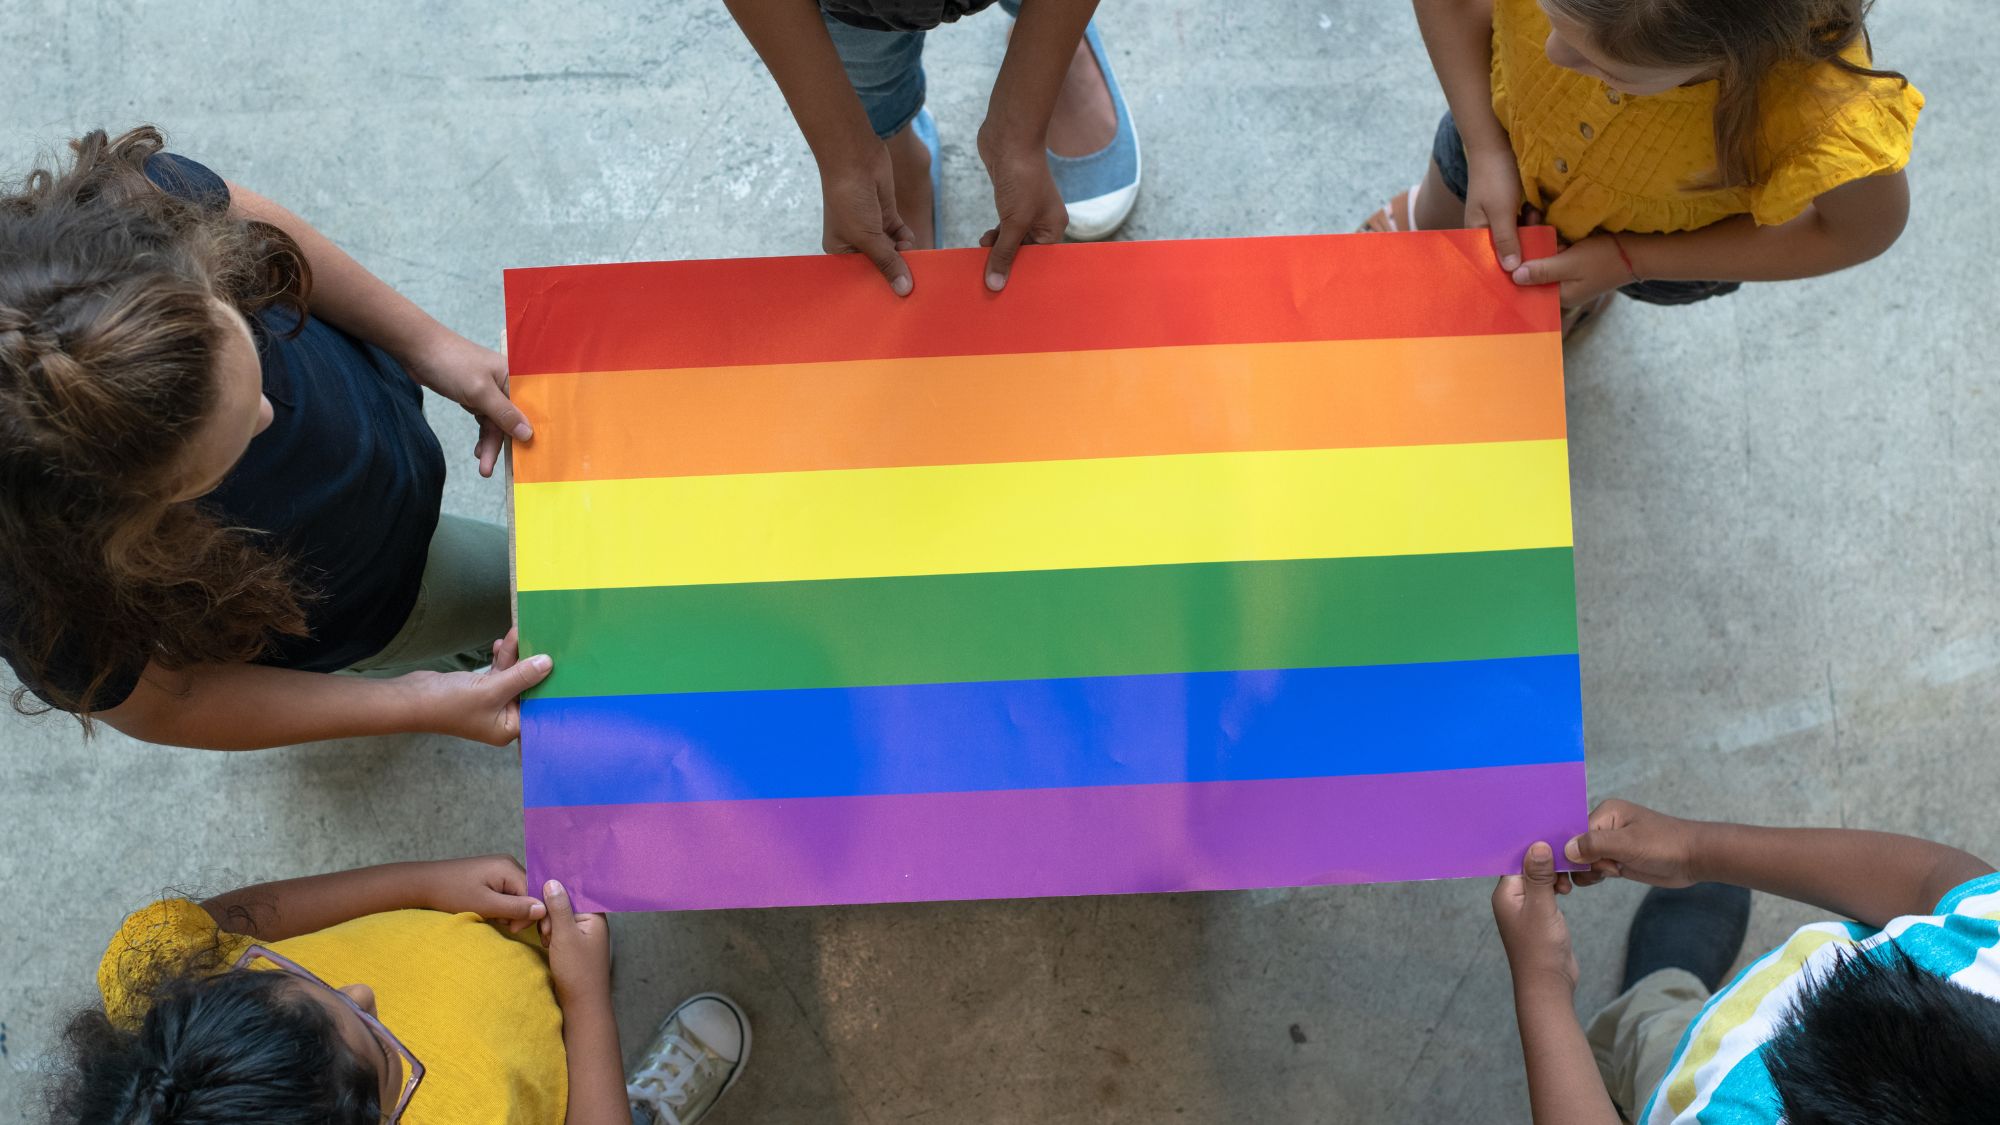 Summer camps for transgender children as young as 4 are gaining popularity, offering activities like chest binders and sleeping bags.